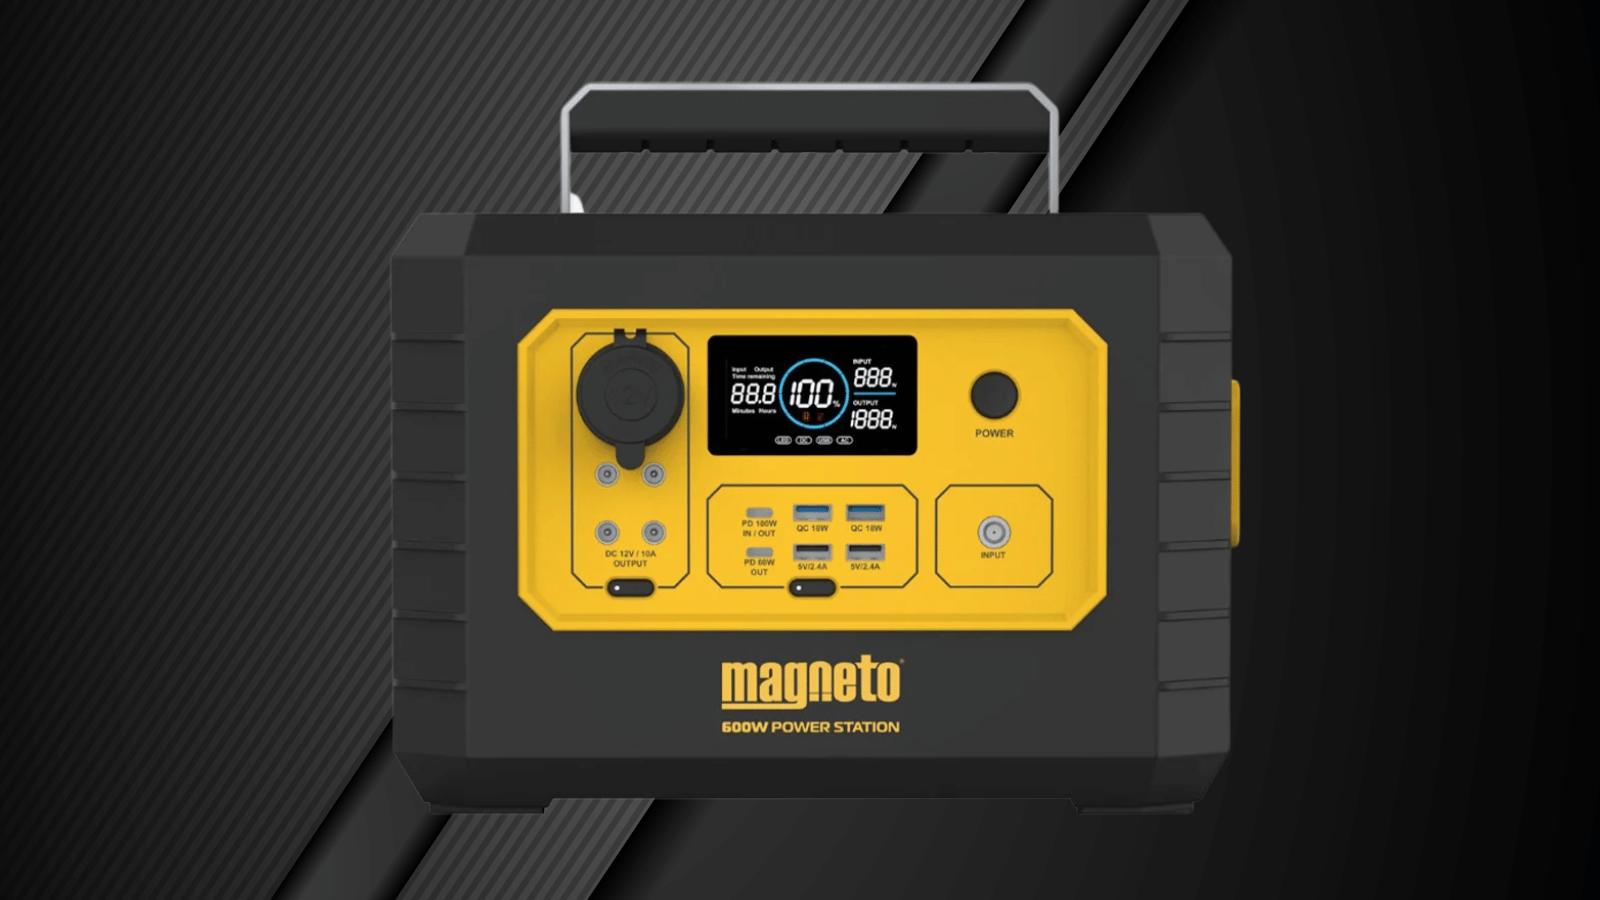 Magneto Portable Power Station 600W Game